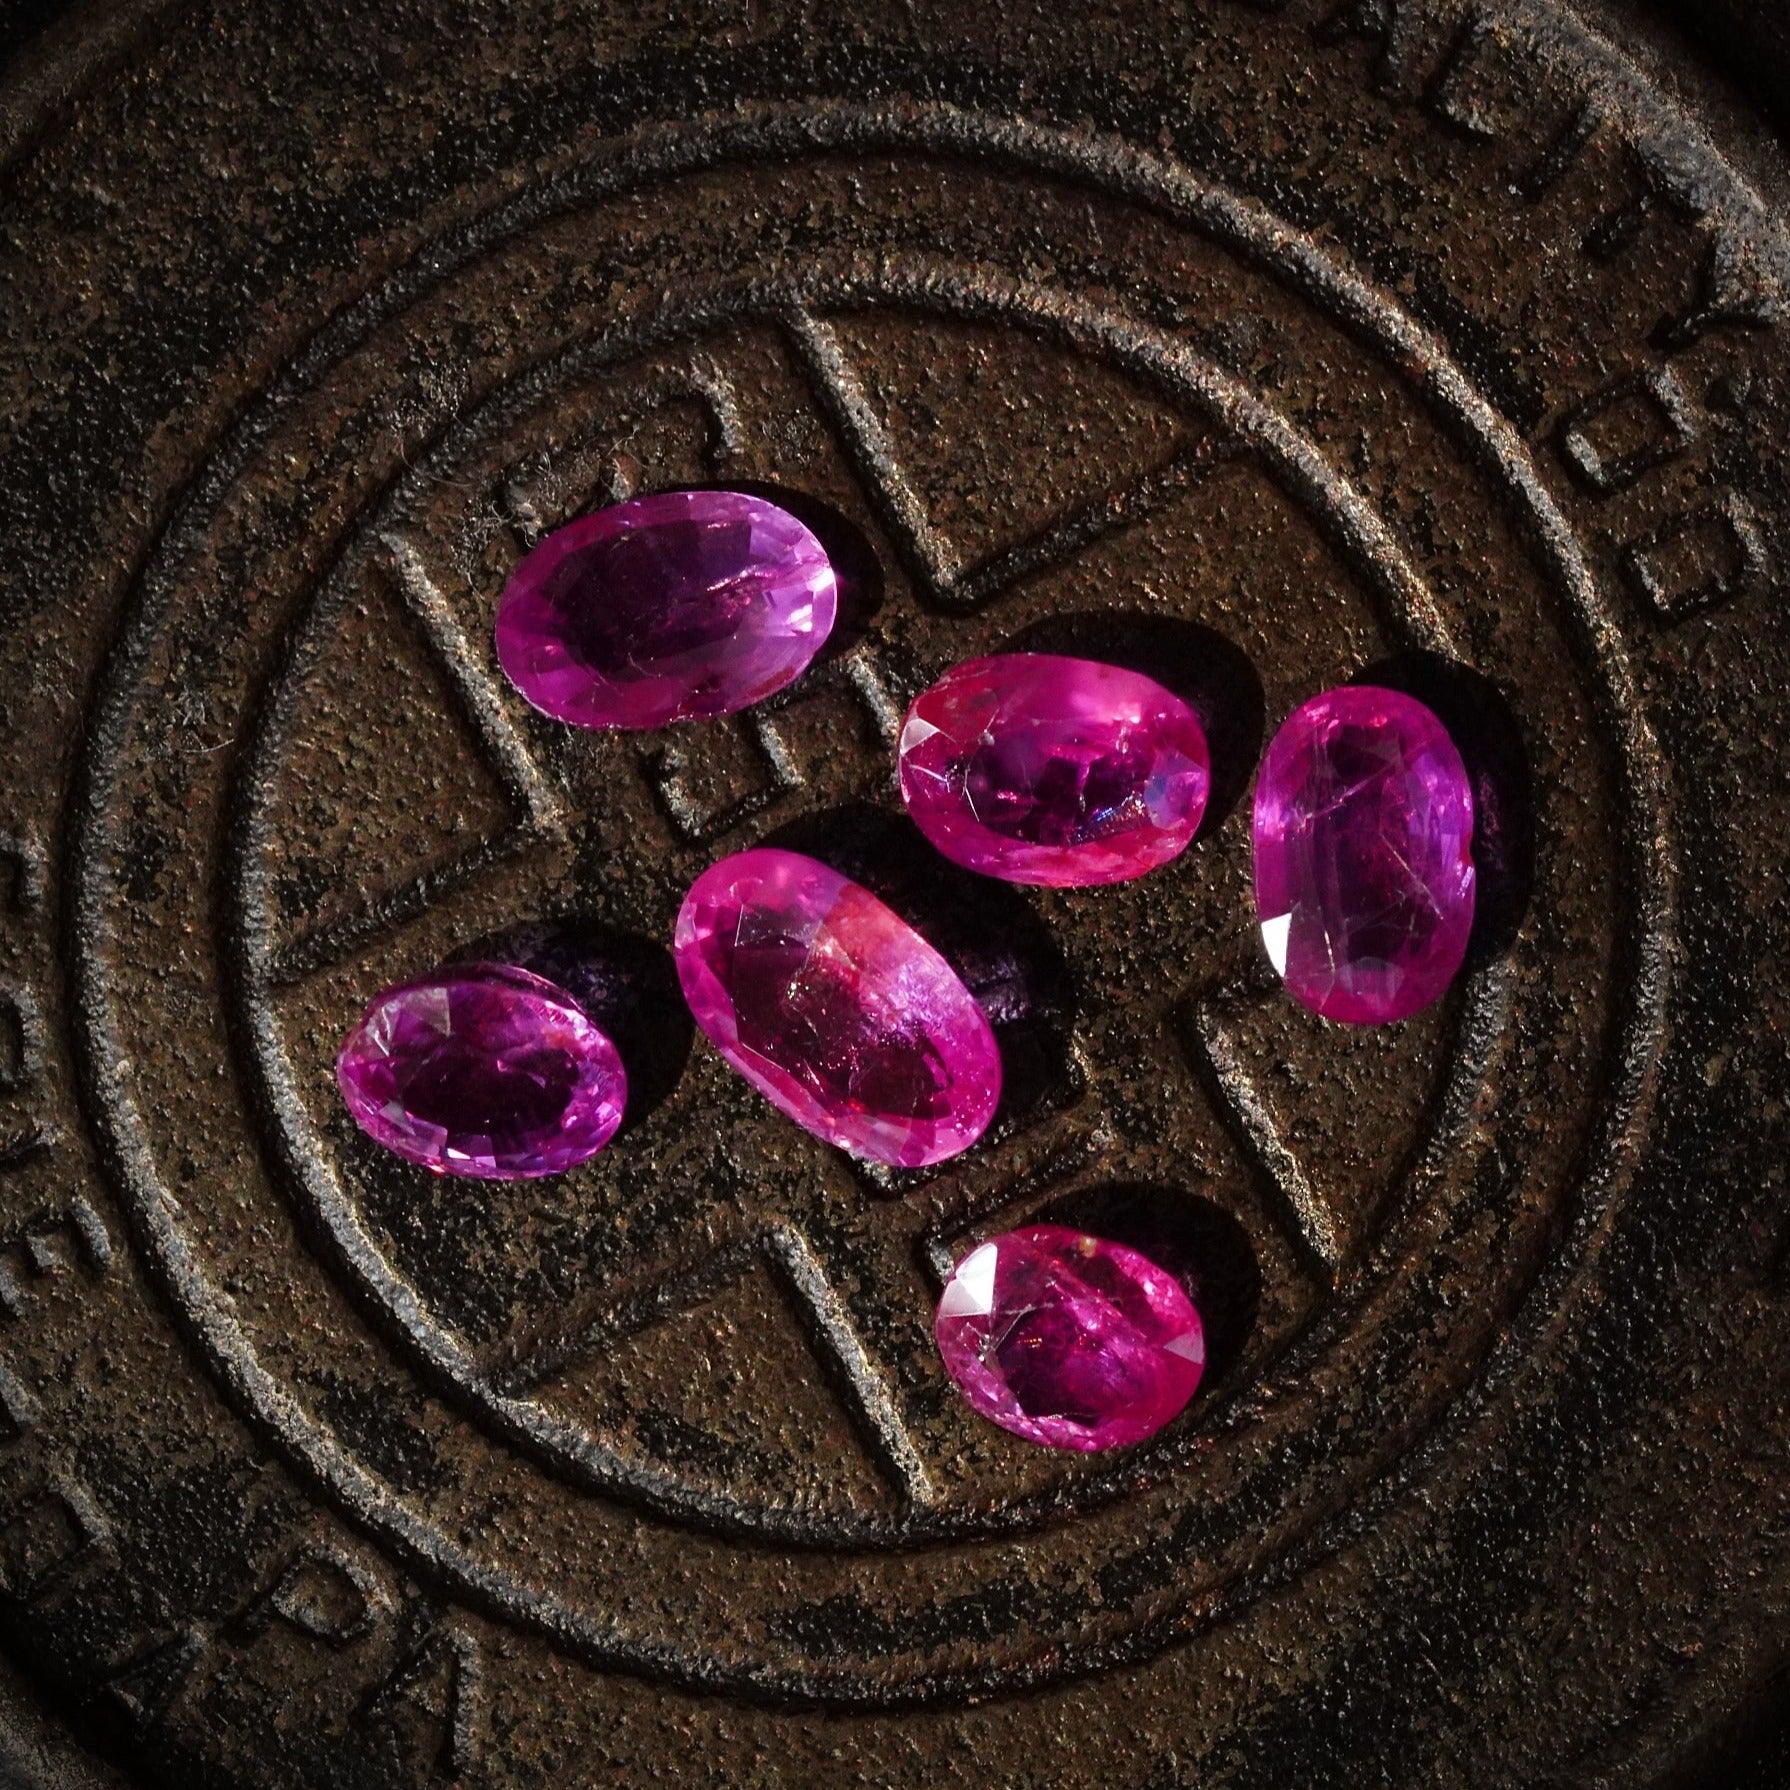 Exquisite Set of Six Fuchsia Sapphires by Jogani - Totaling 11.65 Carats